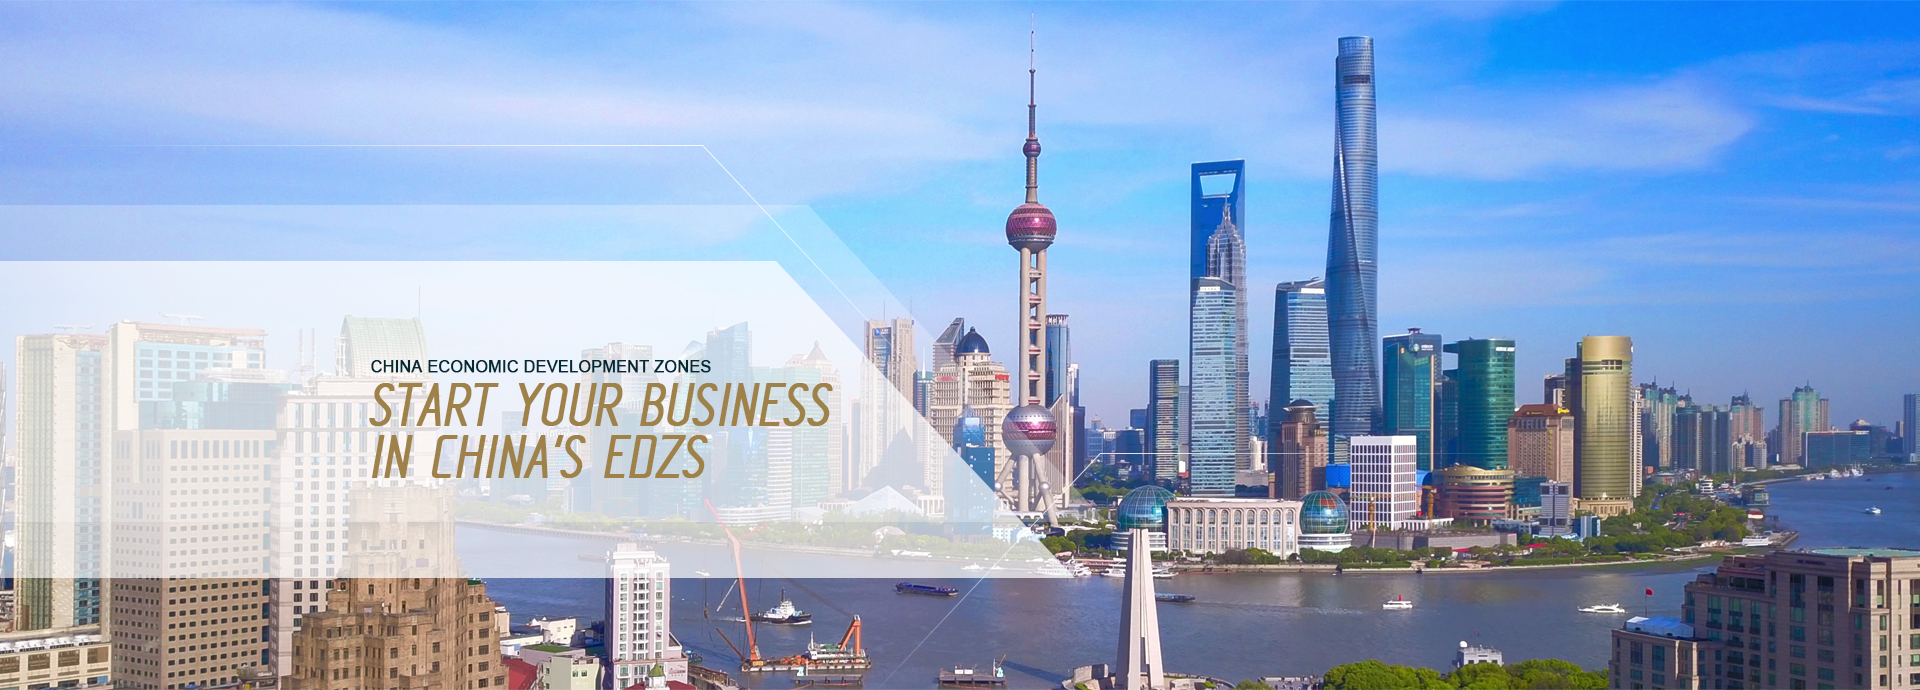 Start Your Business in China's EDZ